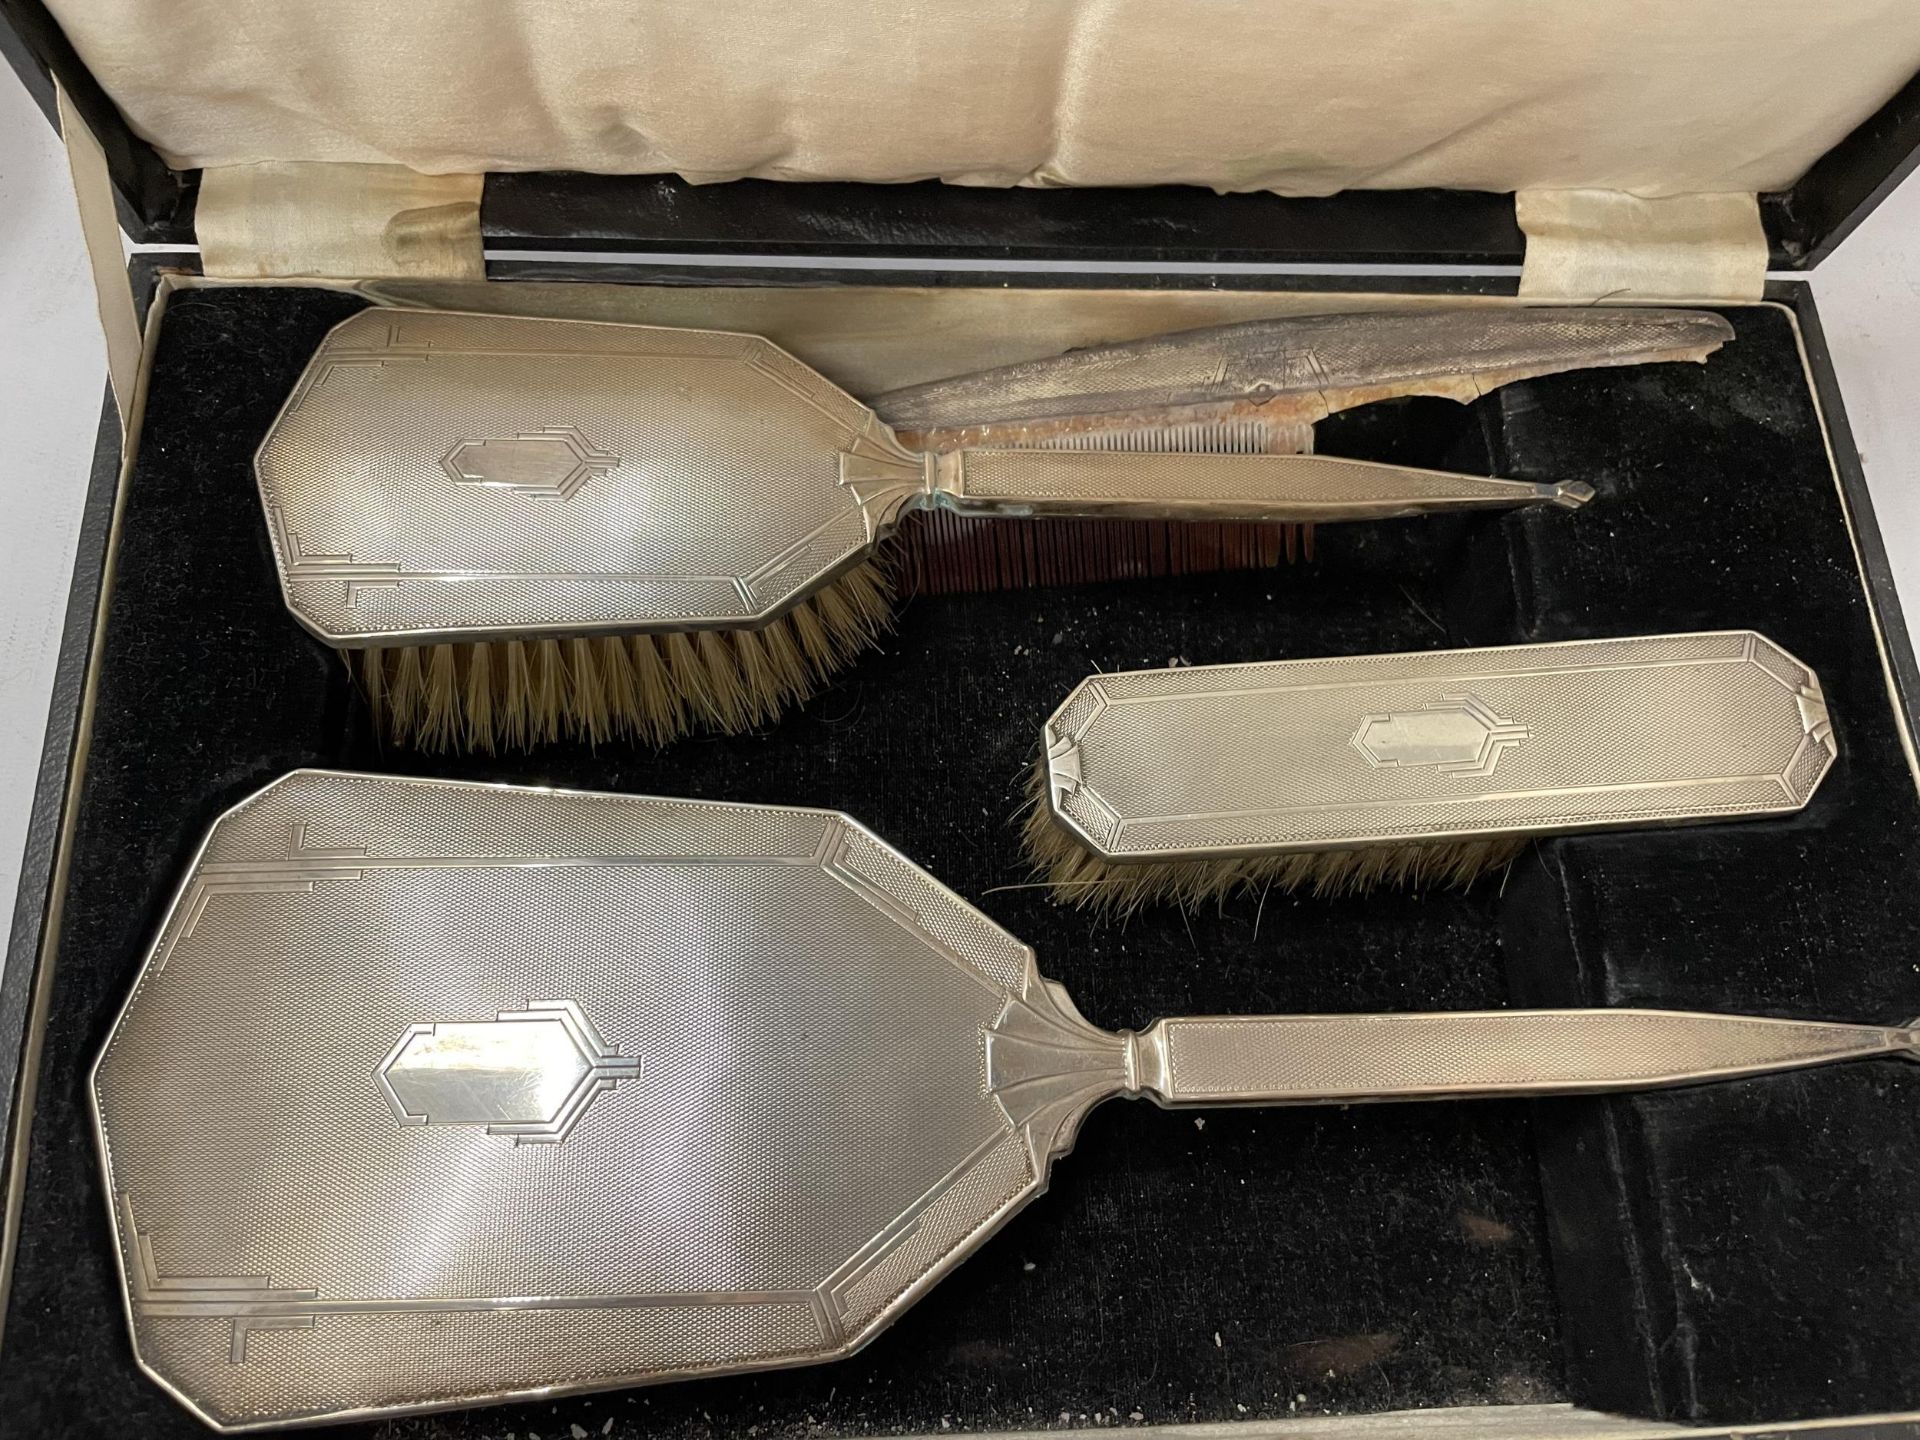 AN ART DECO CASED HALLMARKED SILVER FOUR PIECE ENGINE TURNED DRESSING TABLE SET, TWO BRUSHES, MIRROR - Image 2 of 5